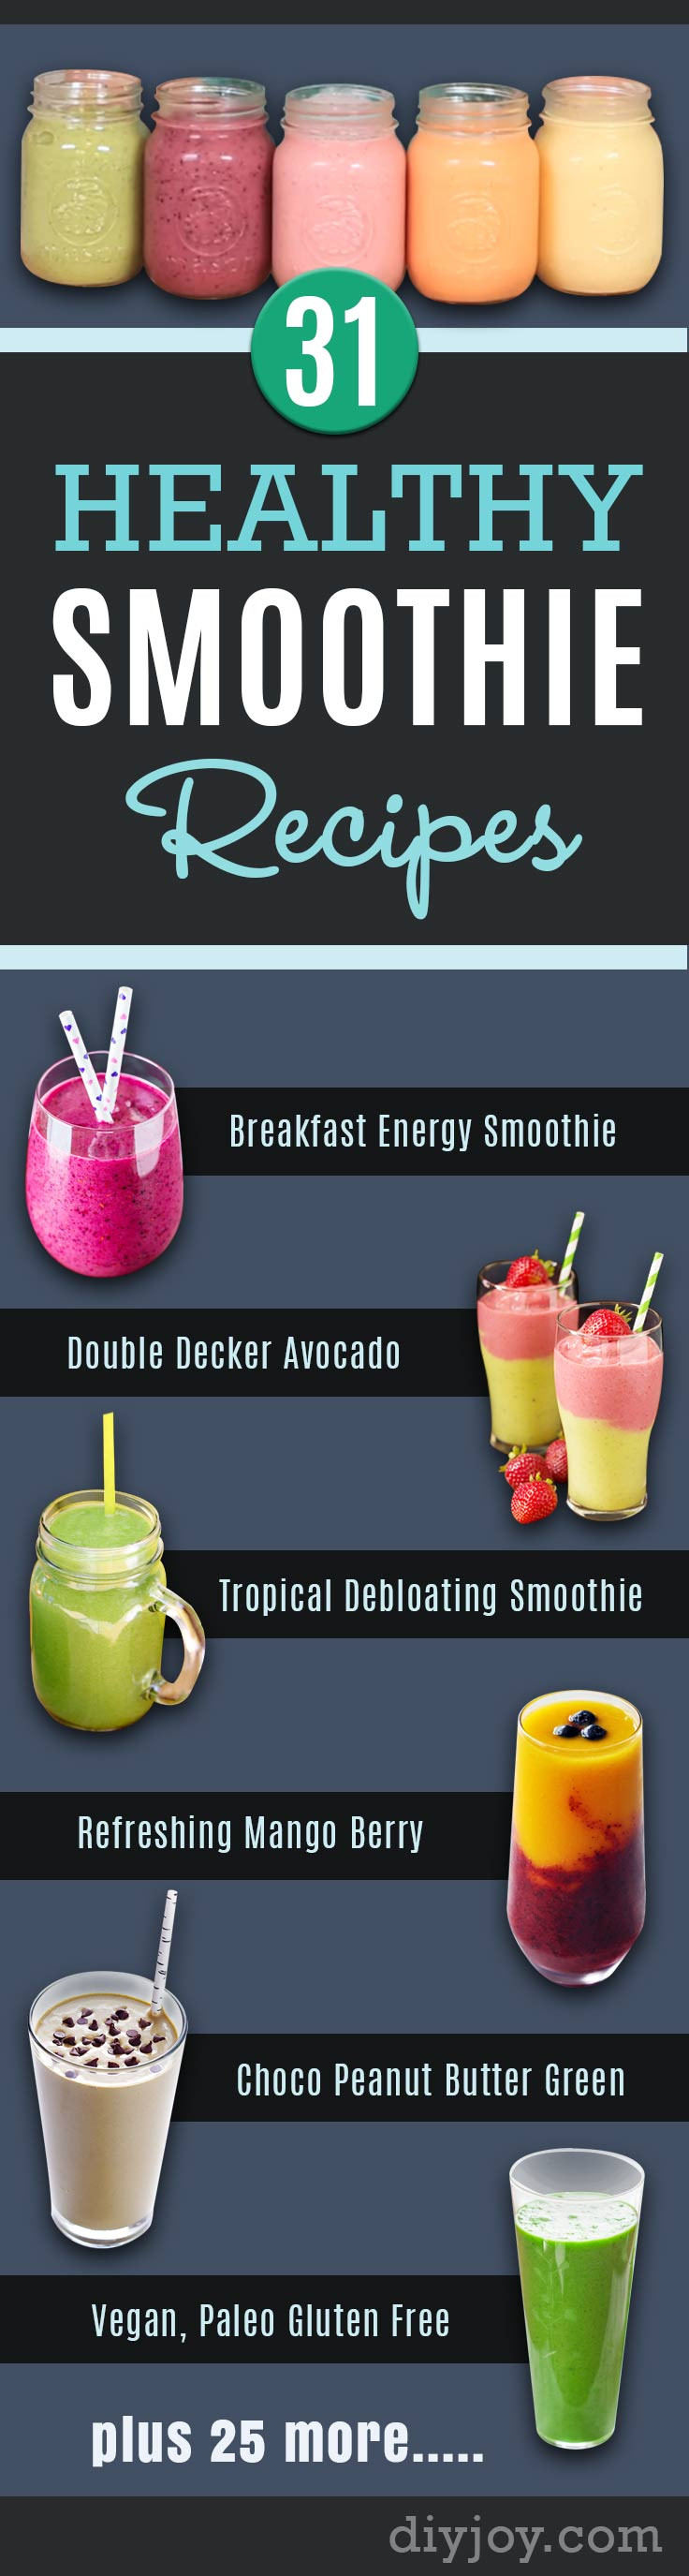 Healthy Lunch Smoothies
 31 Healthy Smoothie Recipes